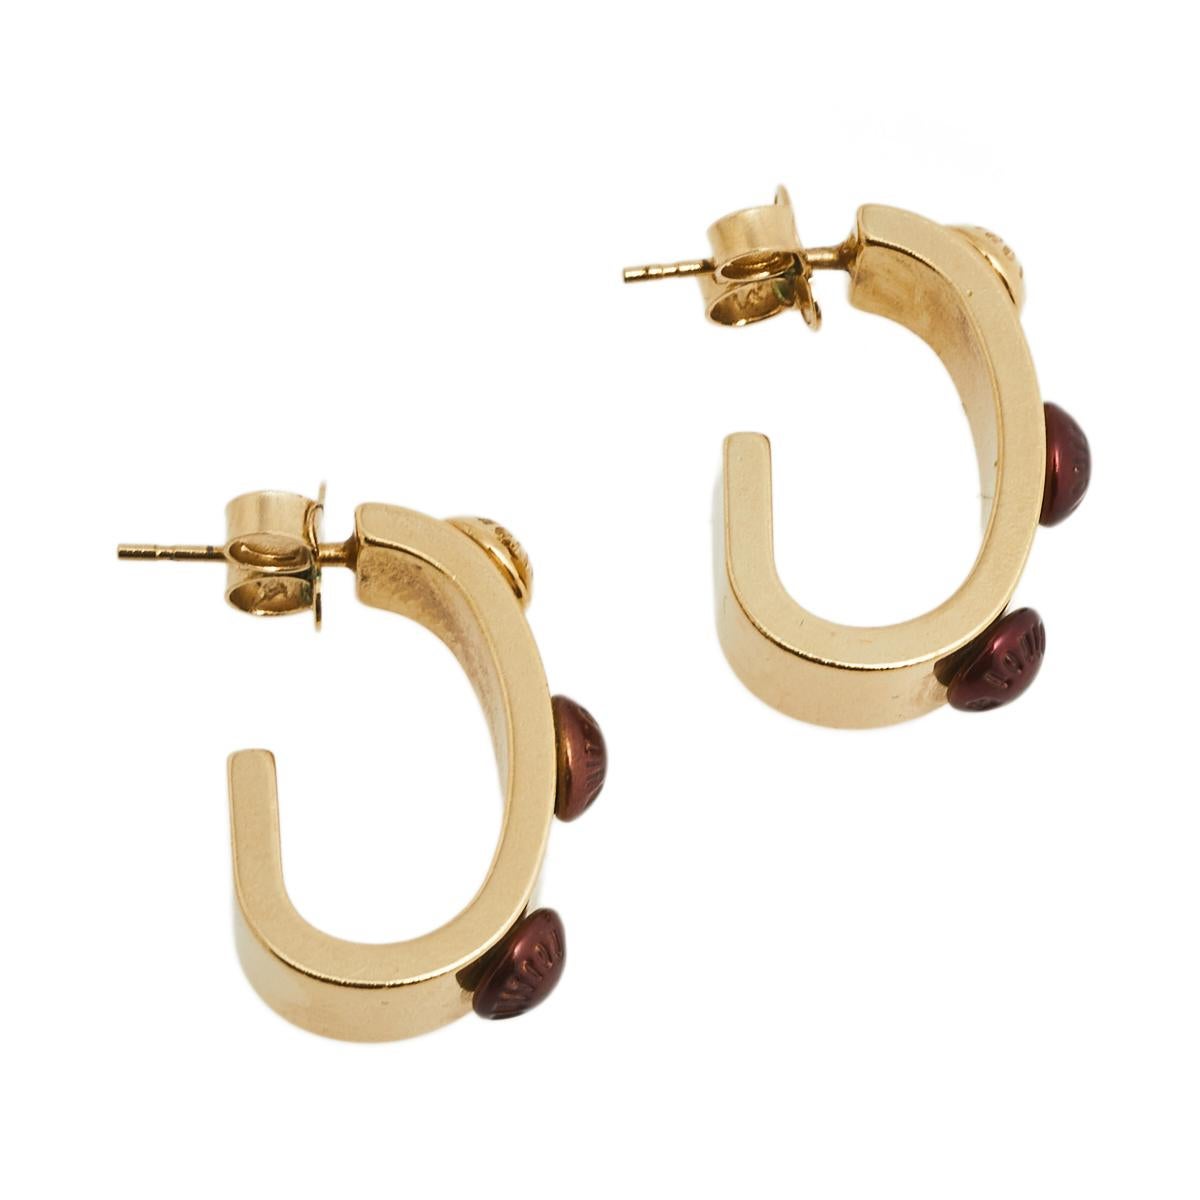 This pair of Gimme A Clue earrings from the house of Louis Vuitton is crafted in gold-tone metal and features red enameled beads all around the hoop style.